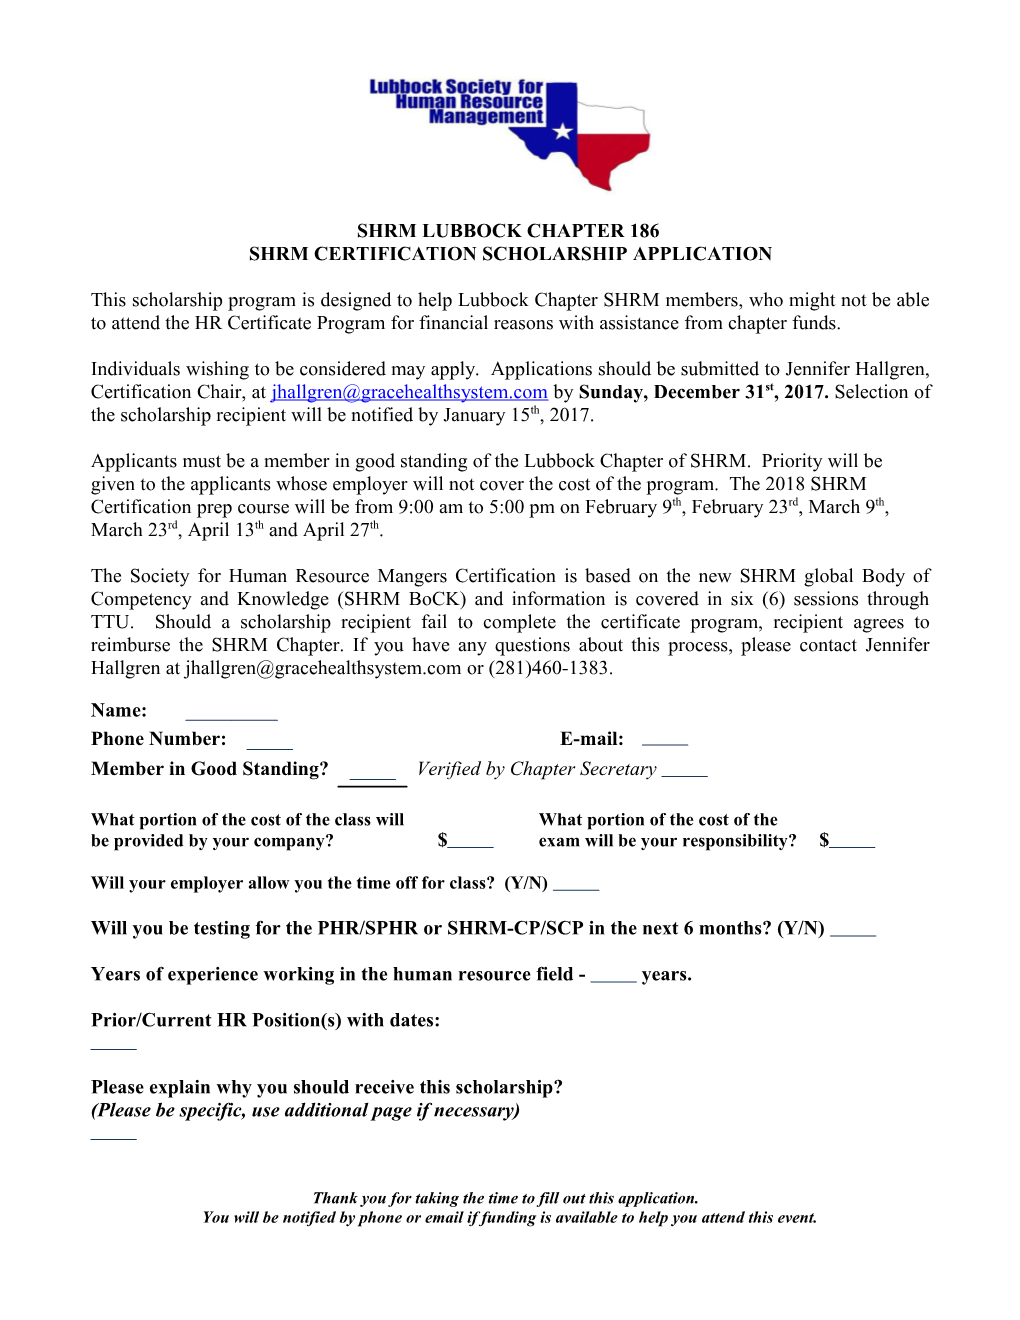 The Seminar Grant Program Is Designed to Help Lubbock Chapter SHRM Members Who Might Not